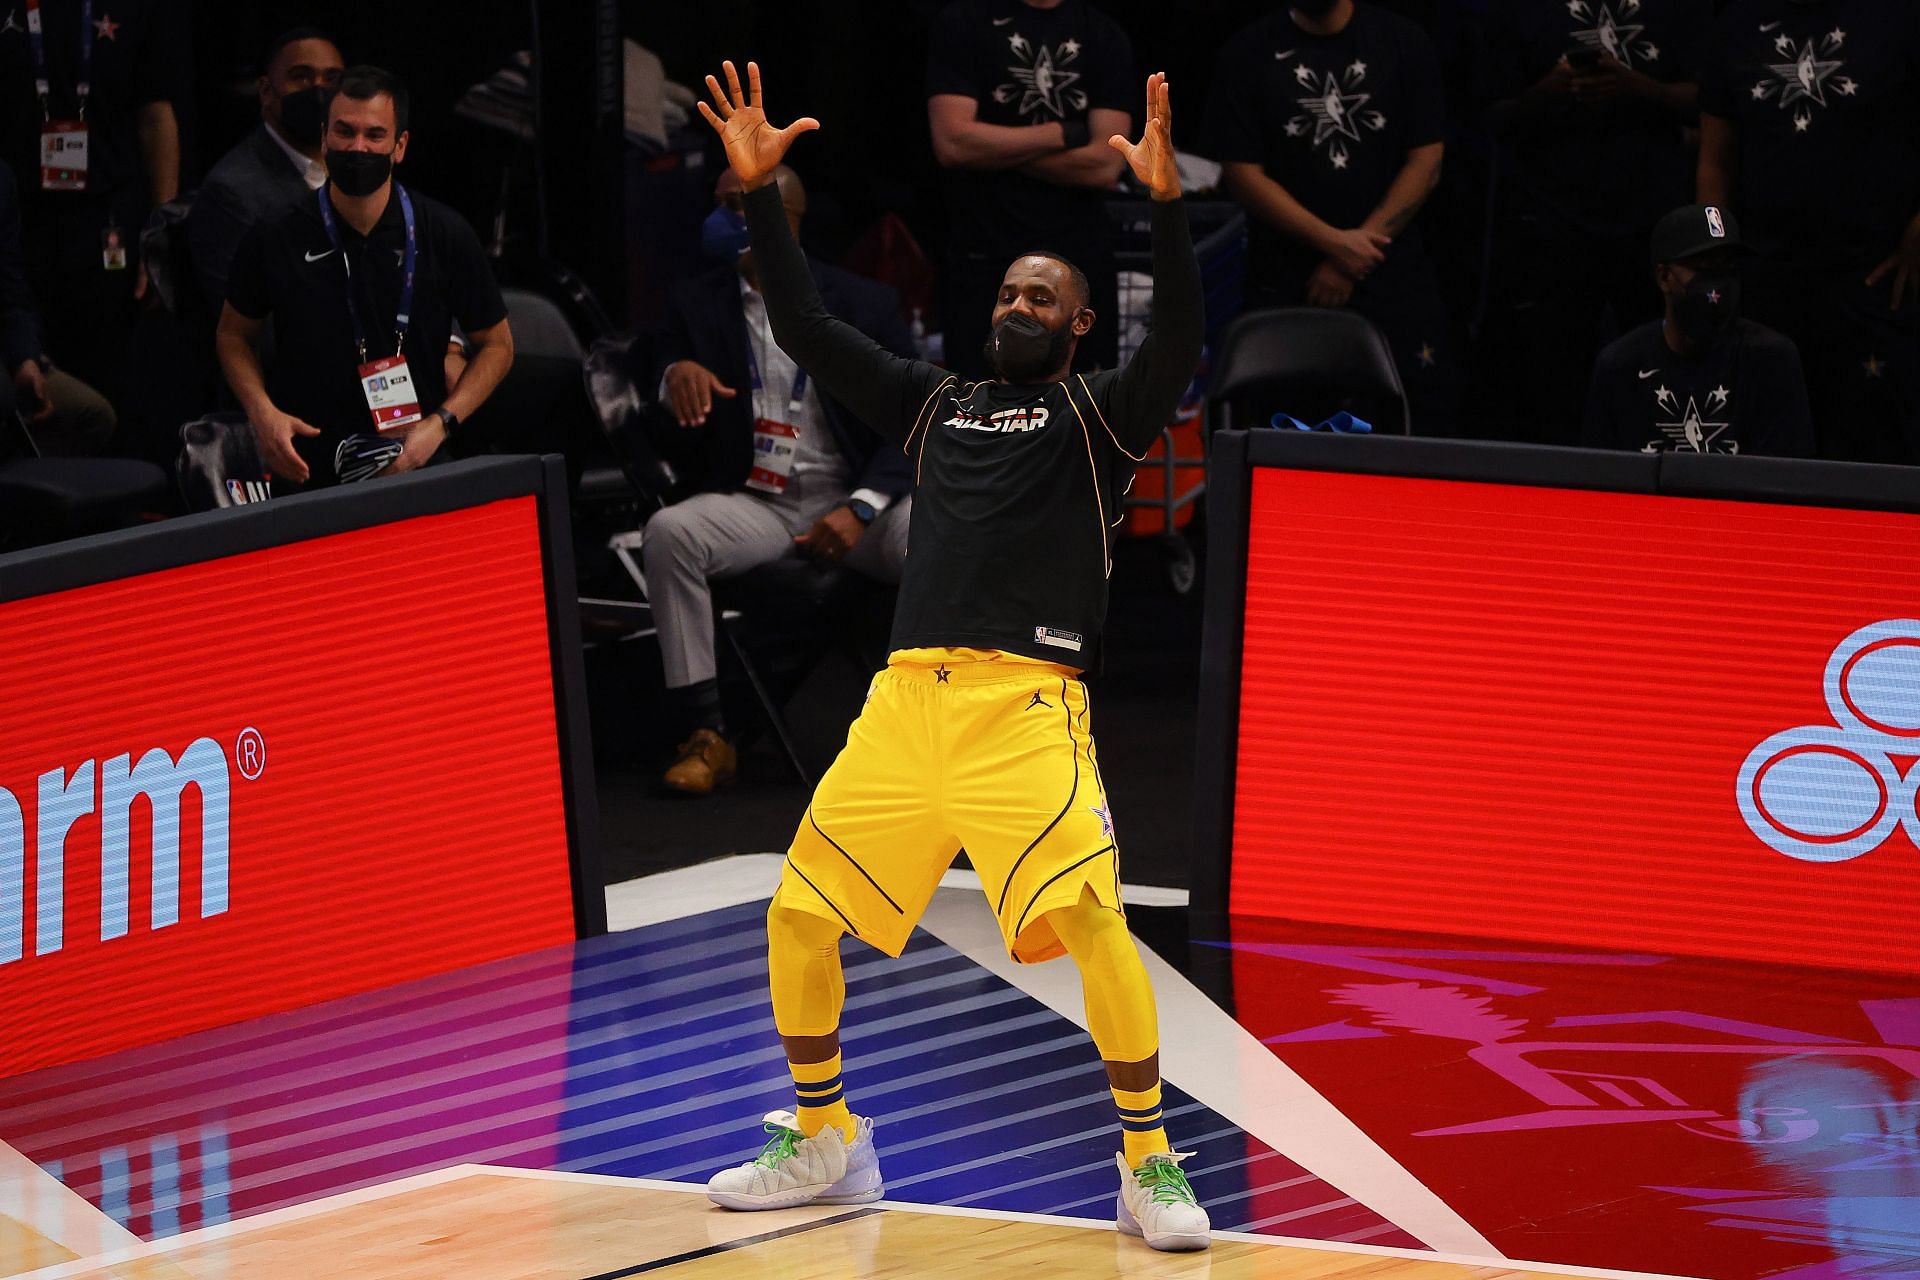 Lebron James of Team LeBron celebrates against Team Durant during the 70th NBA All-Star Game on March 7, 2021 in Atlanta, Georgia.